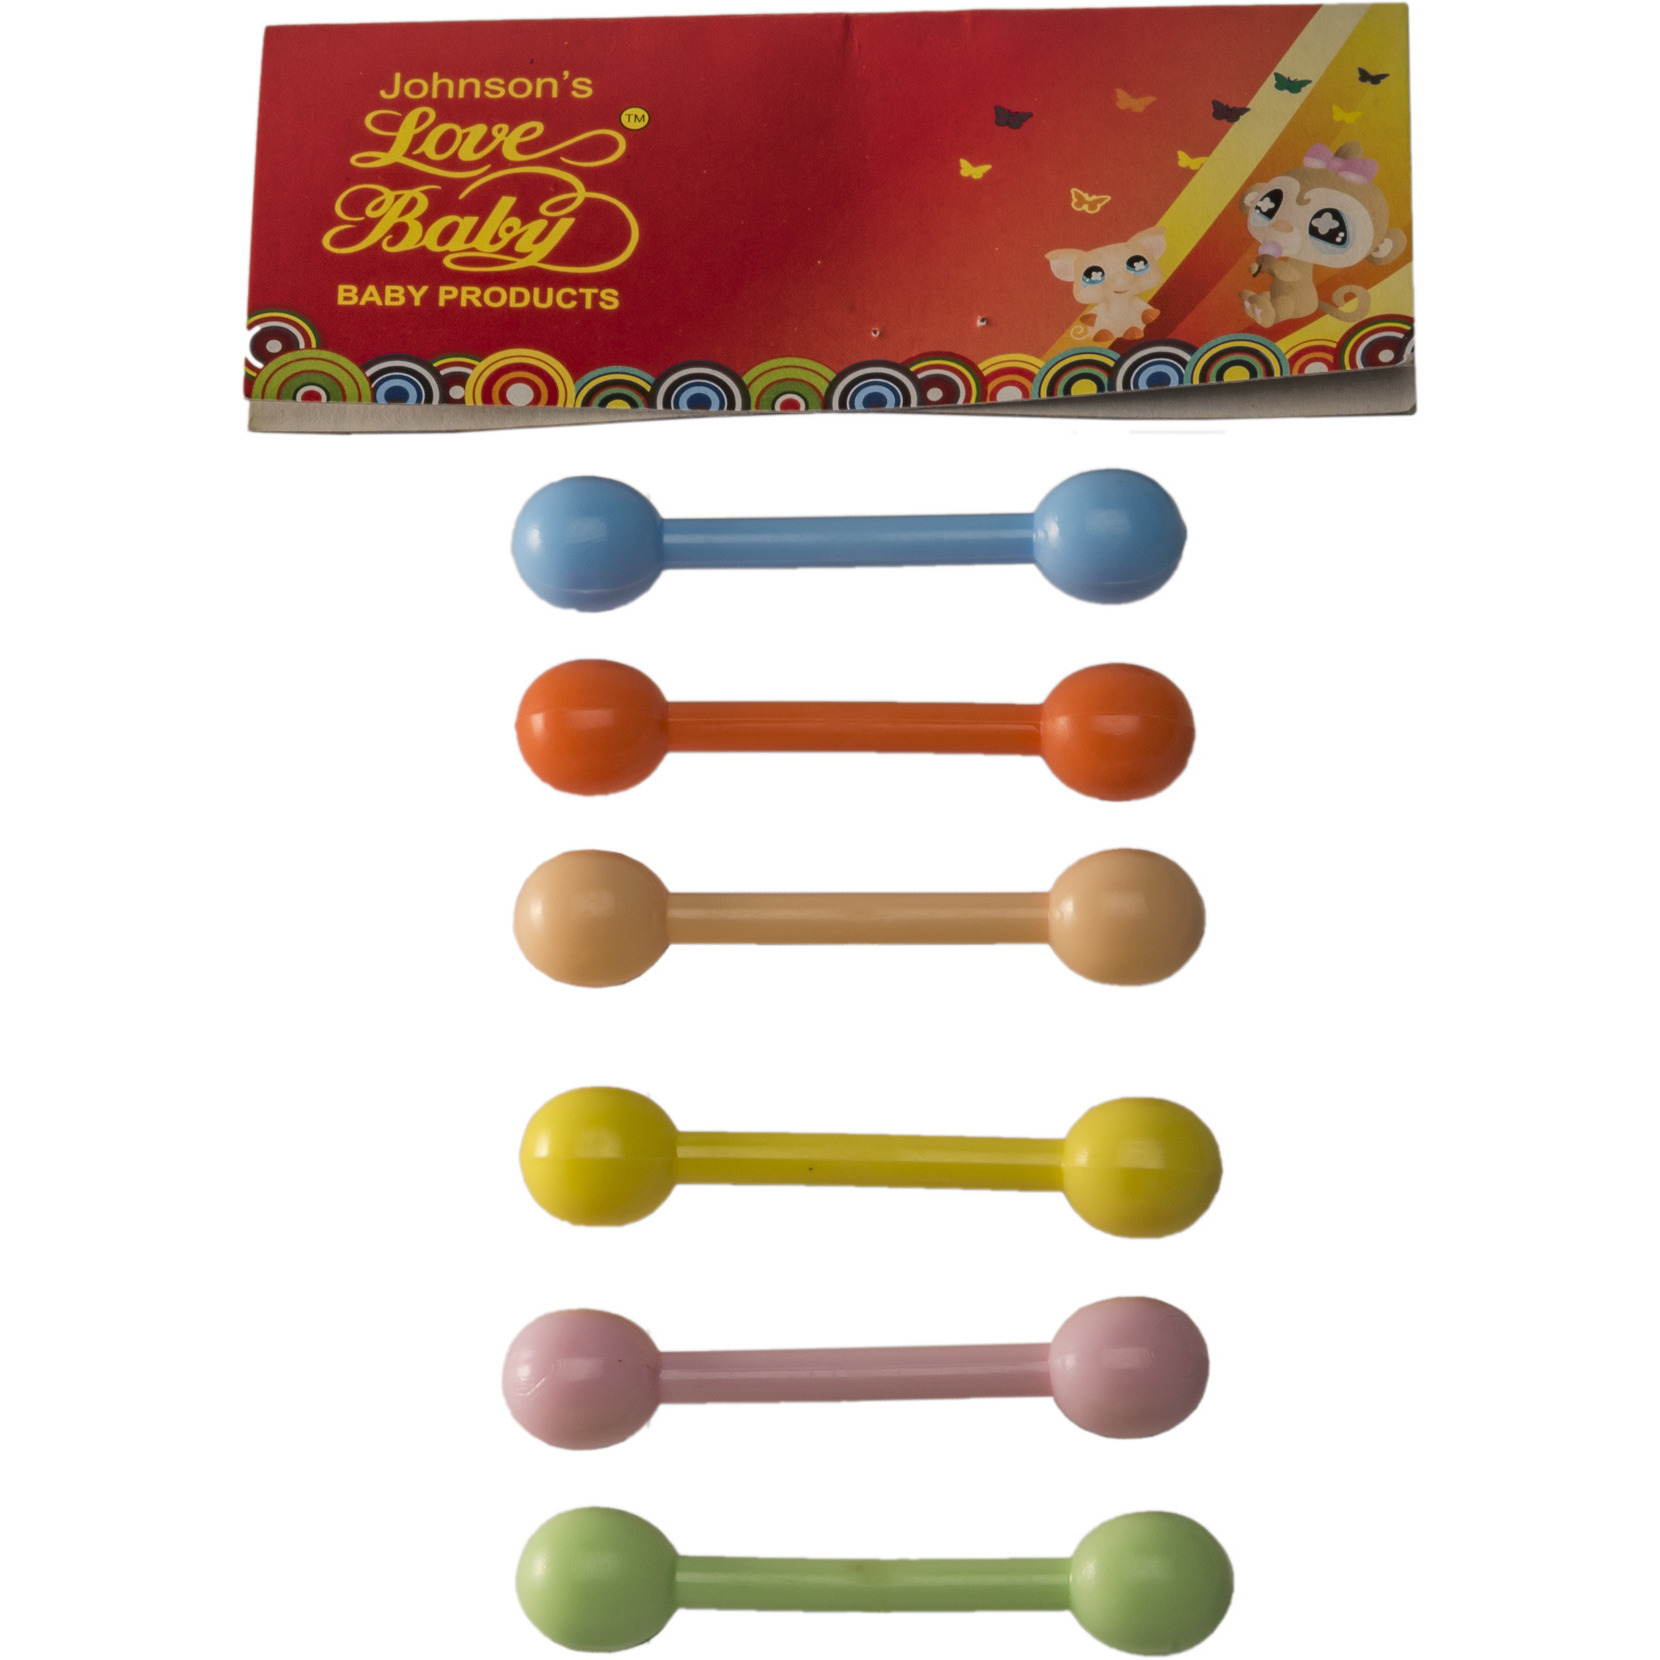 Love Baby Baby Teething Stick Pack of 6 - BT12